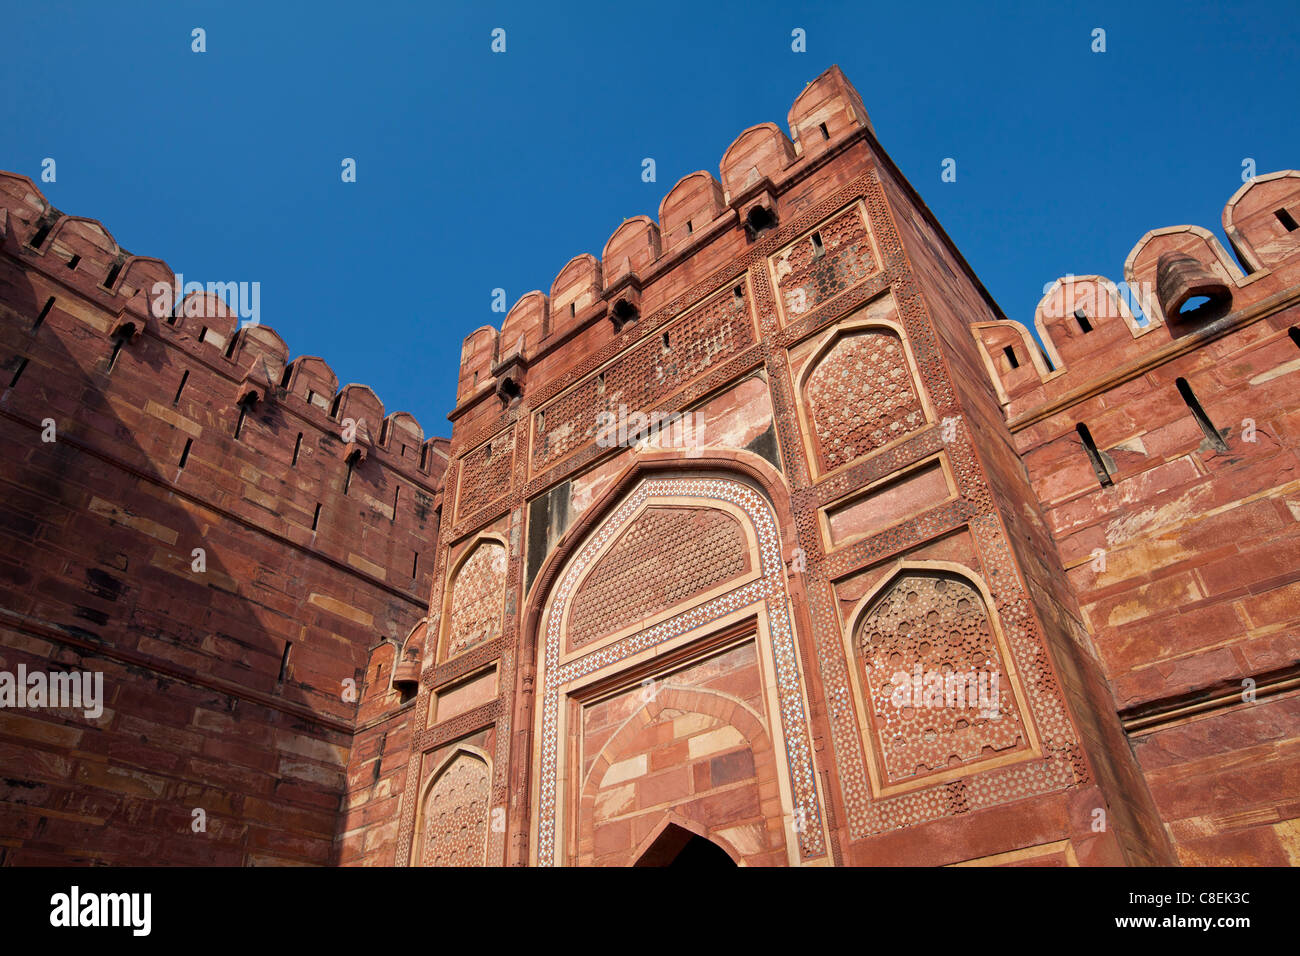 Amar Singh Gate of Agra Fort, 17th Century residence of Great Mughals and Mughal fort in Agra, Northern India Stock Photo